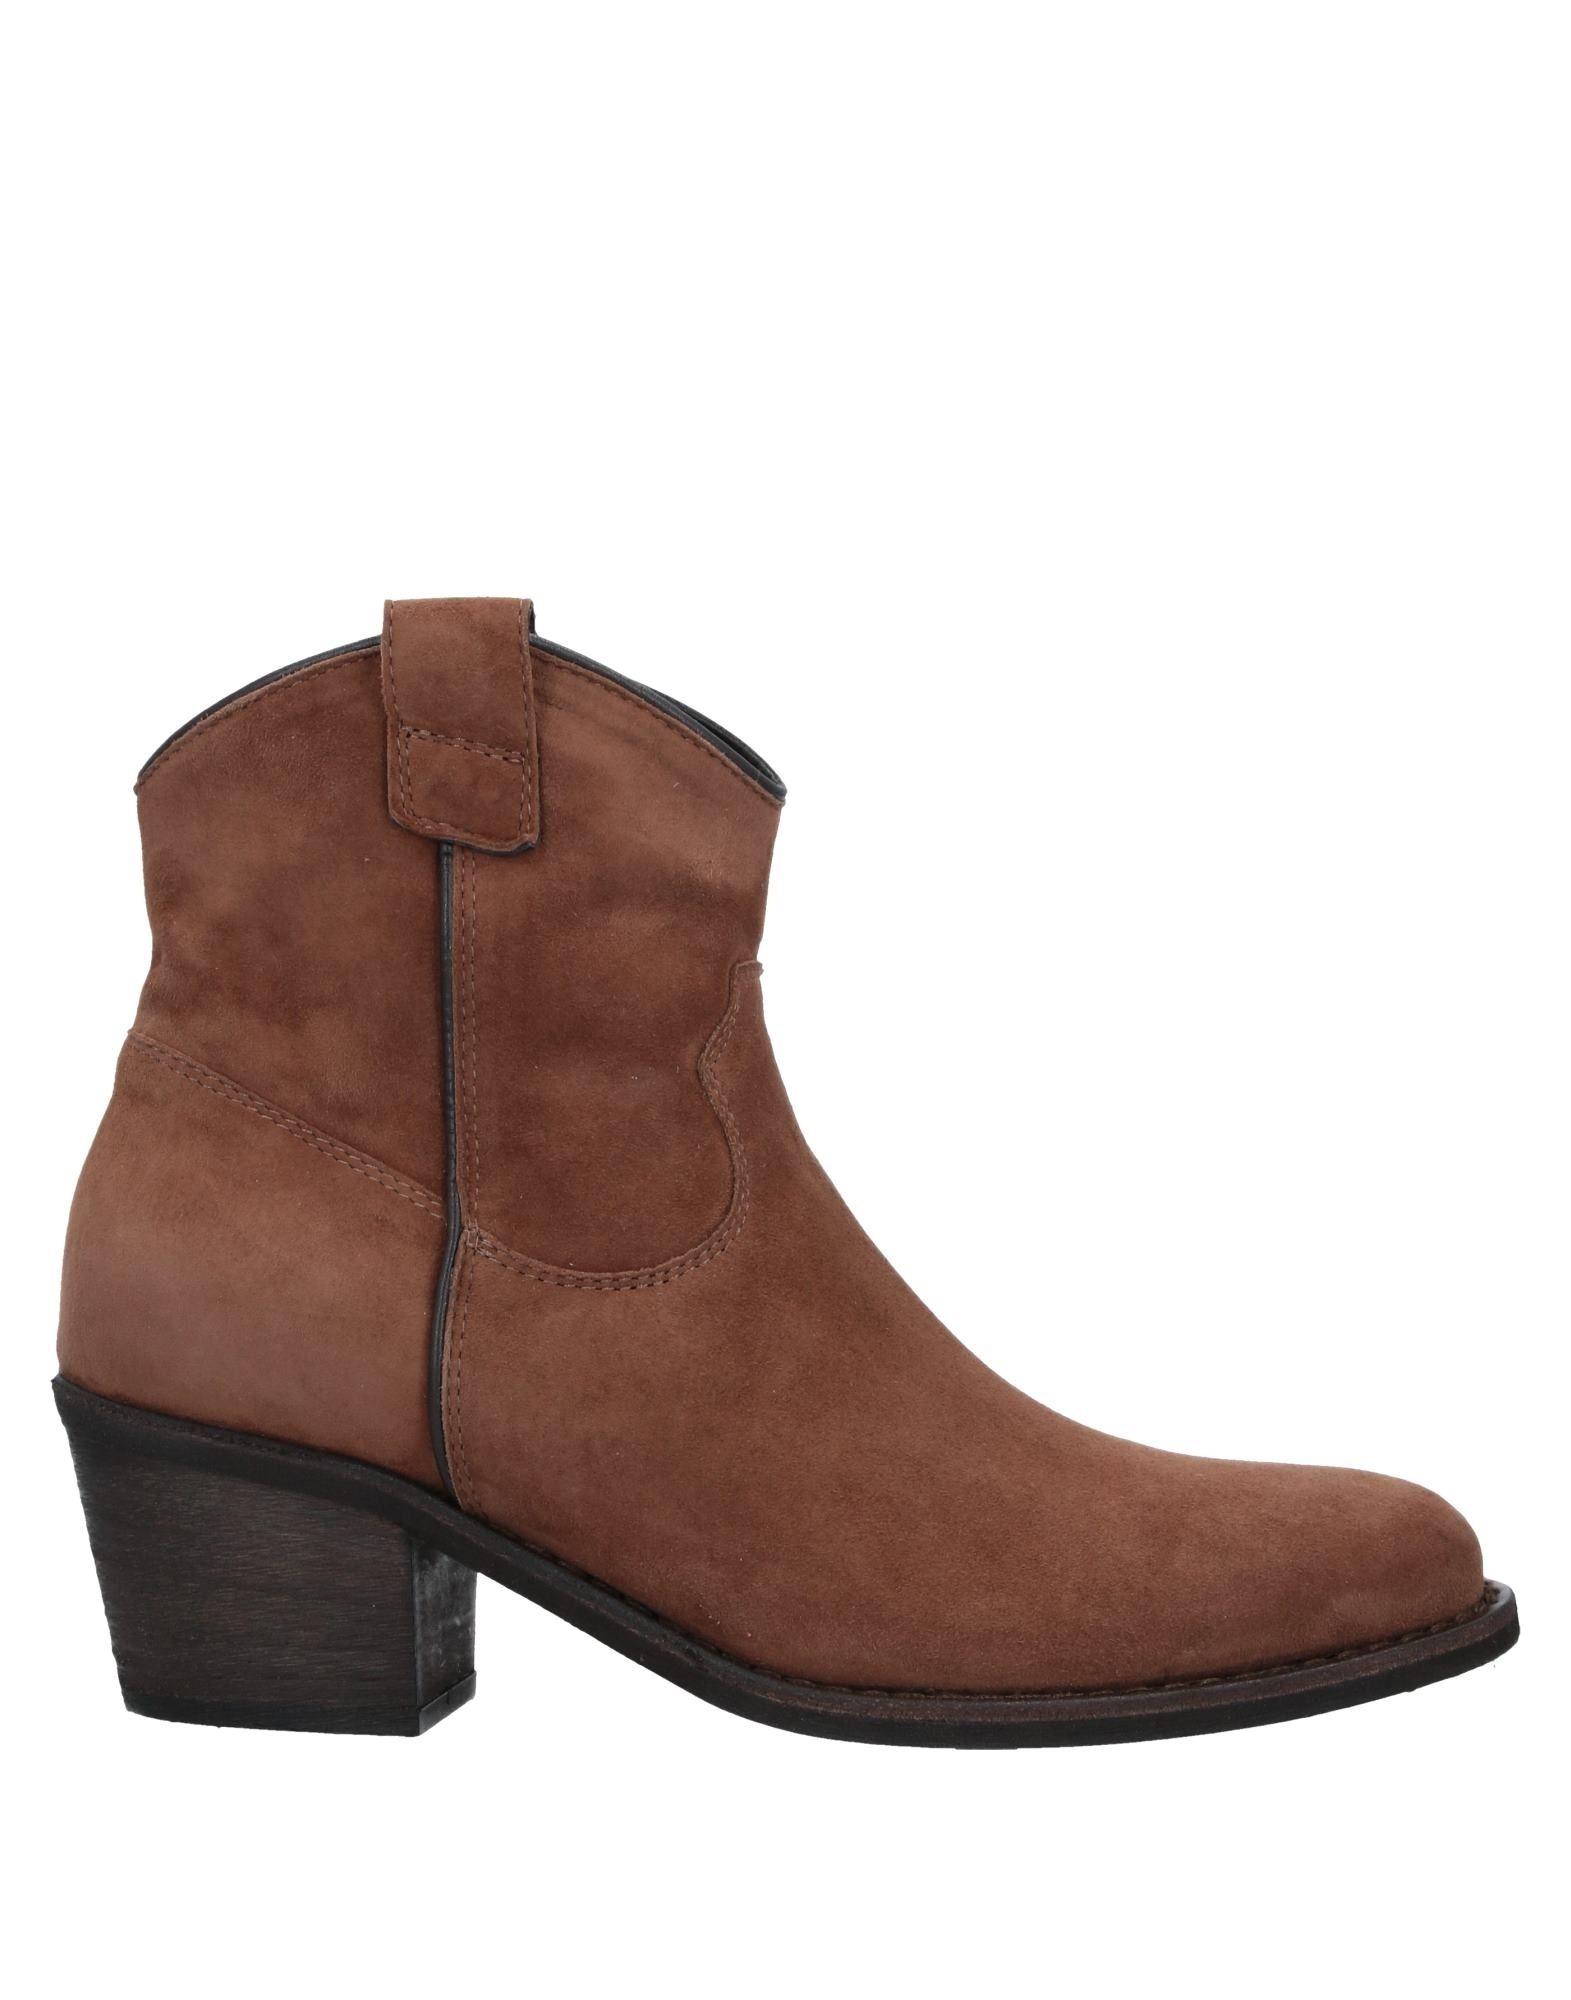 Via Roma 15 Ankle Boots in Brown - Lyst